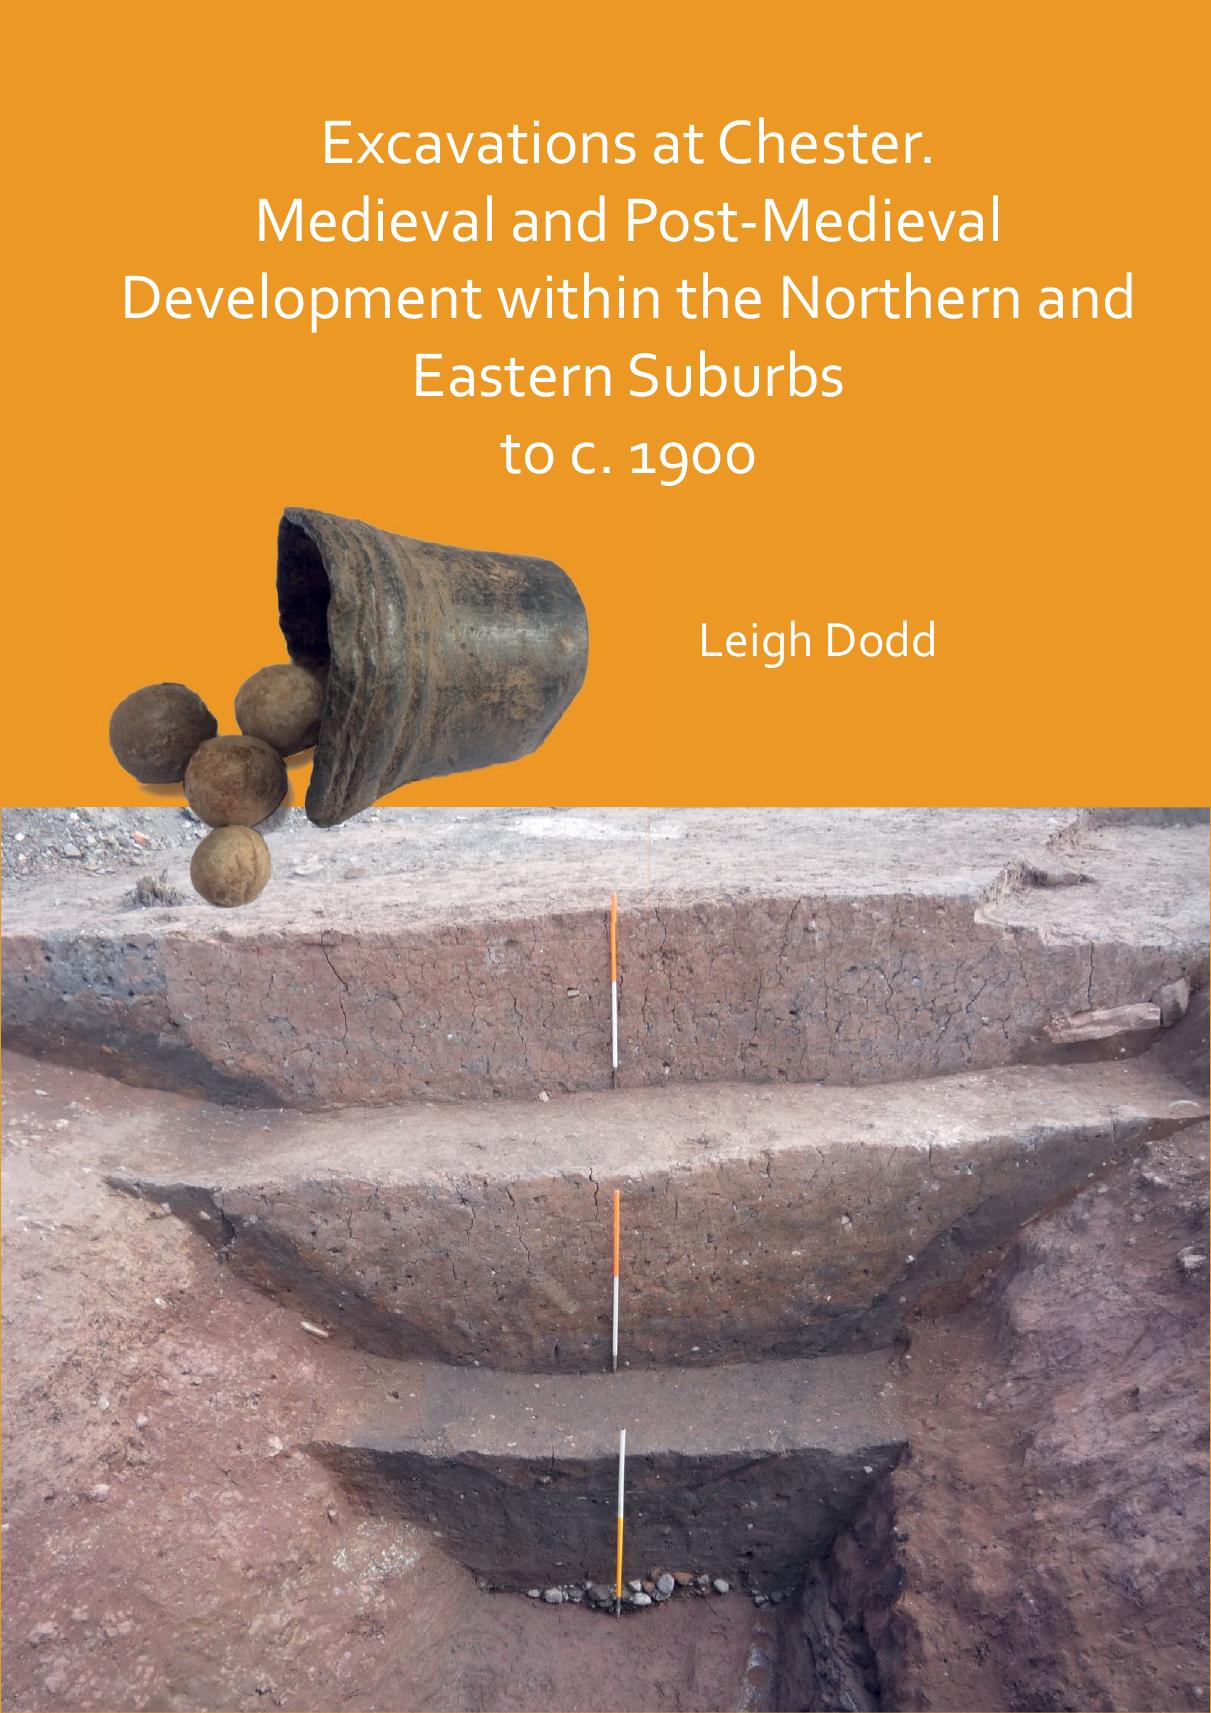 Excavations at Chester. Medieval and Post-medieval Development Within the Northern and Eastern Suburbs to C. 1900 by Leigh Dodd